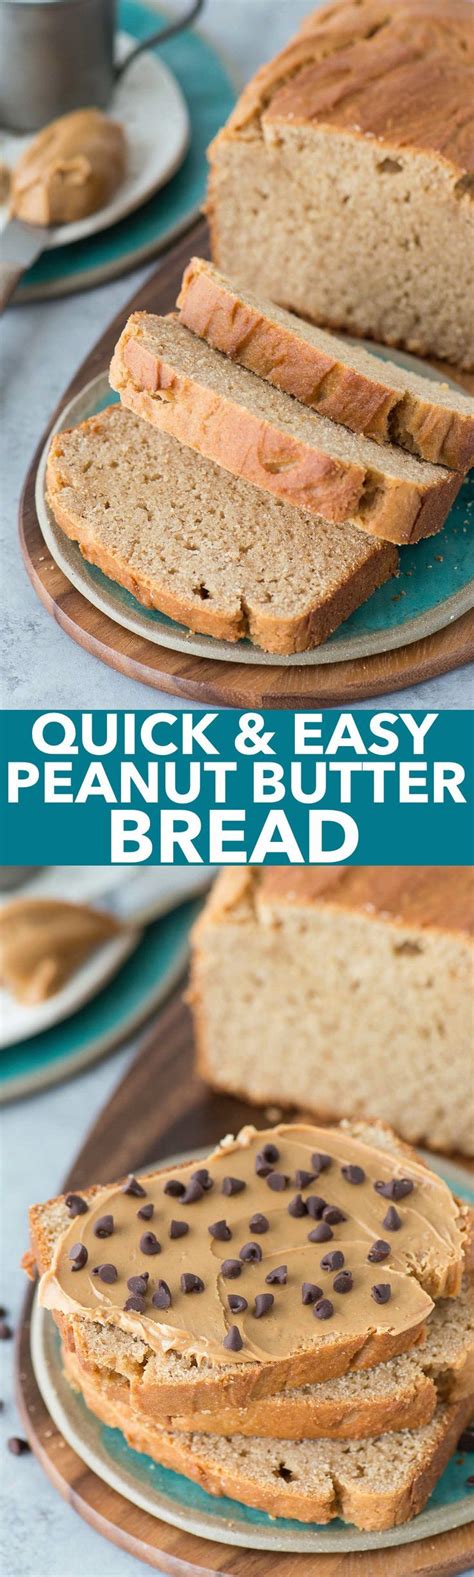 1 Hour Peanut Butter Quick Bread Easy To Make And Delicious With